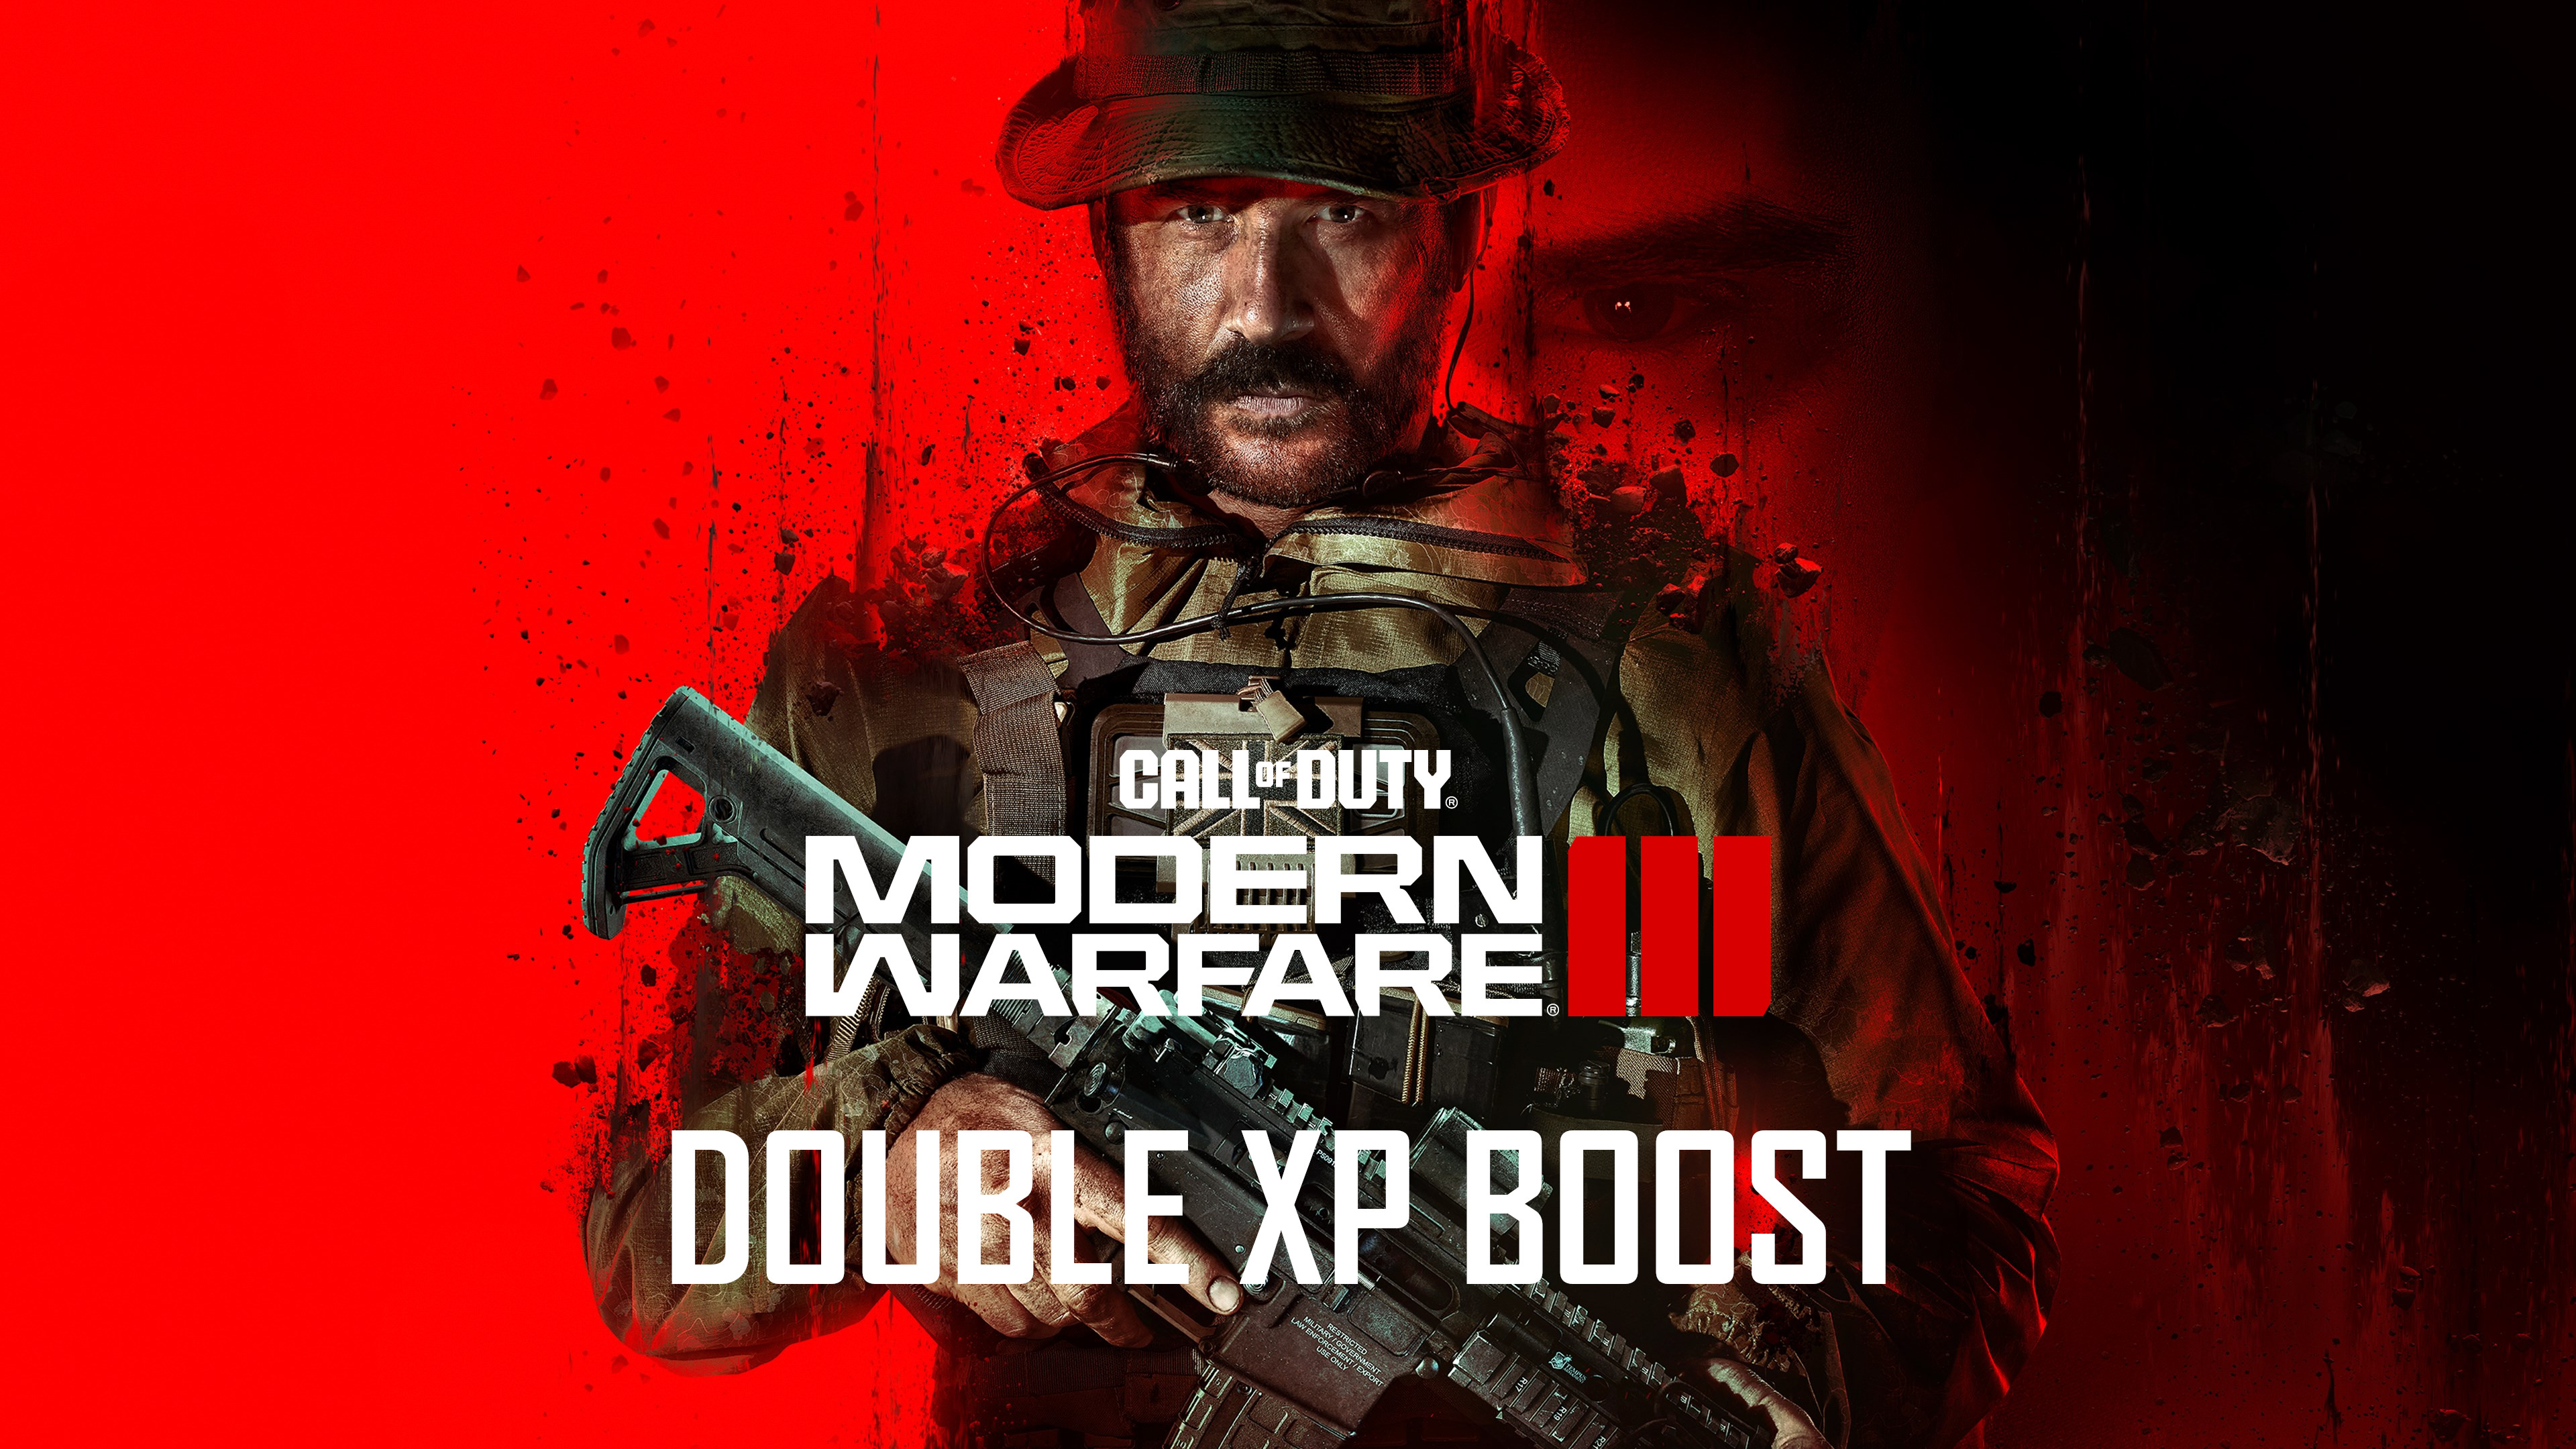 Call of Duty: Modern Warfare III - 3 Hours Double XP Boost PC/PS4/PS5/XBOX One/Series X|S CD Key 1.93 $